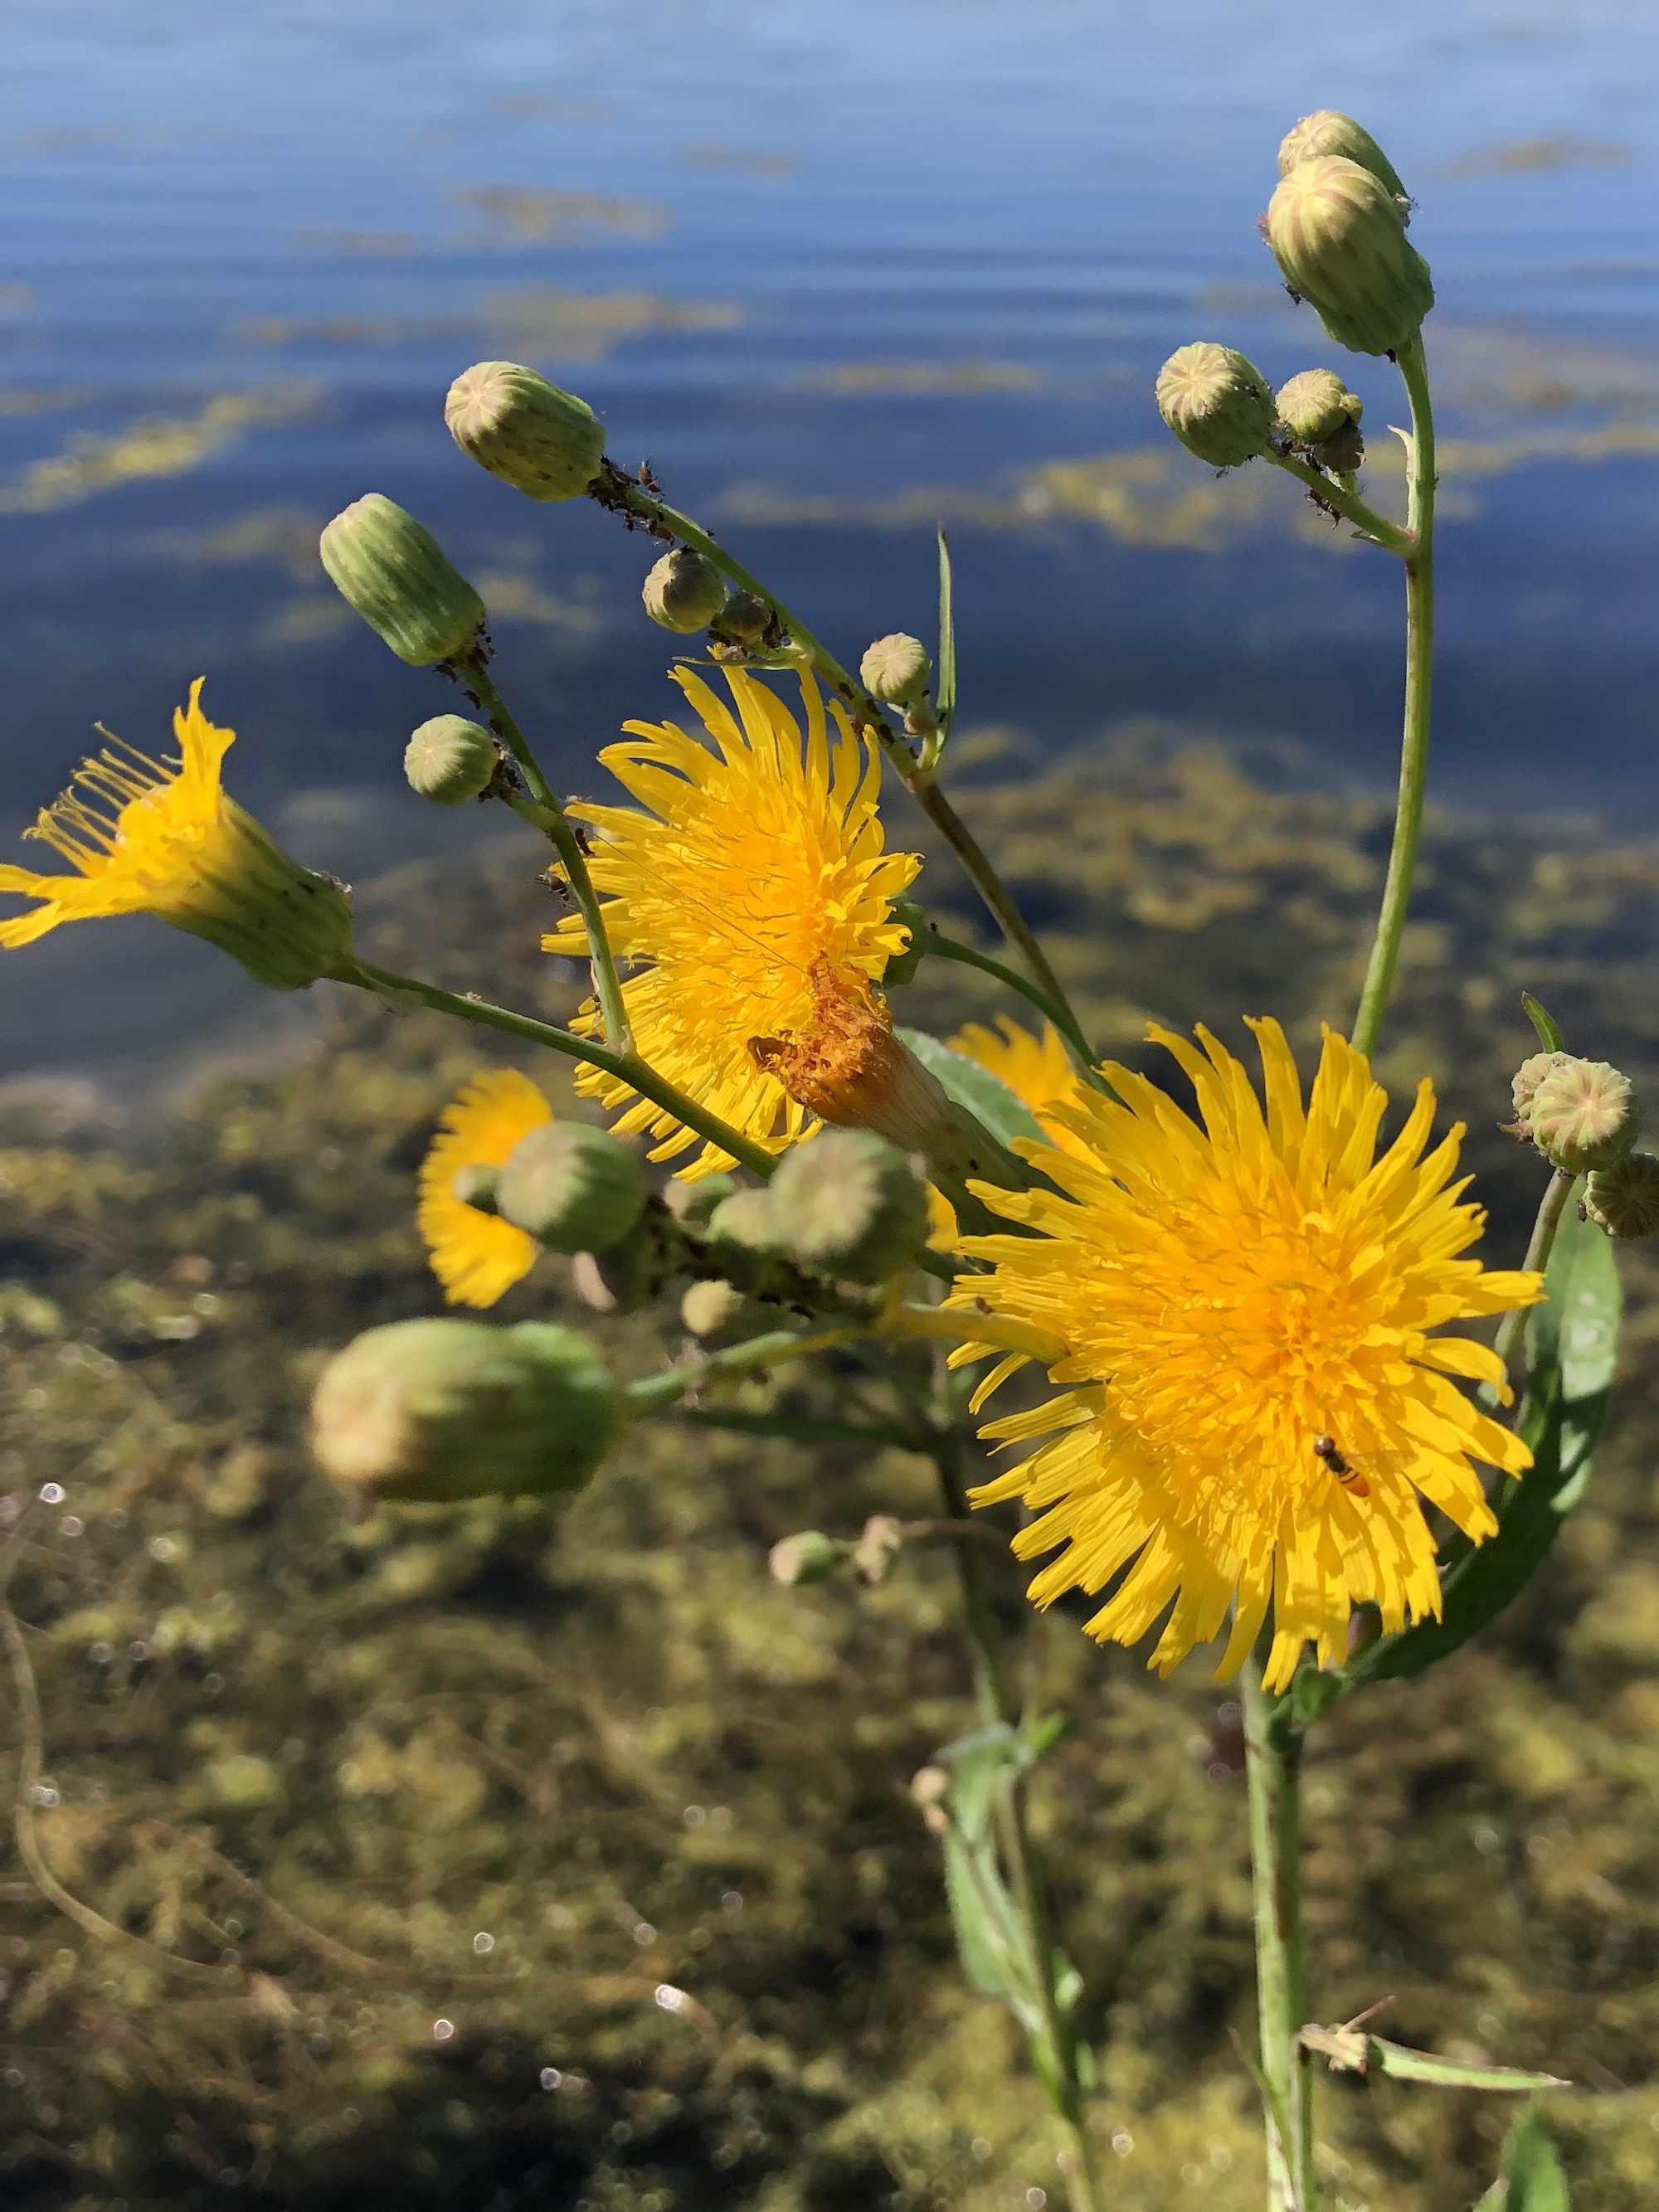 Perennial Sowthistle along shore of Lake Wingra on July 10, 2022.